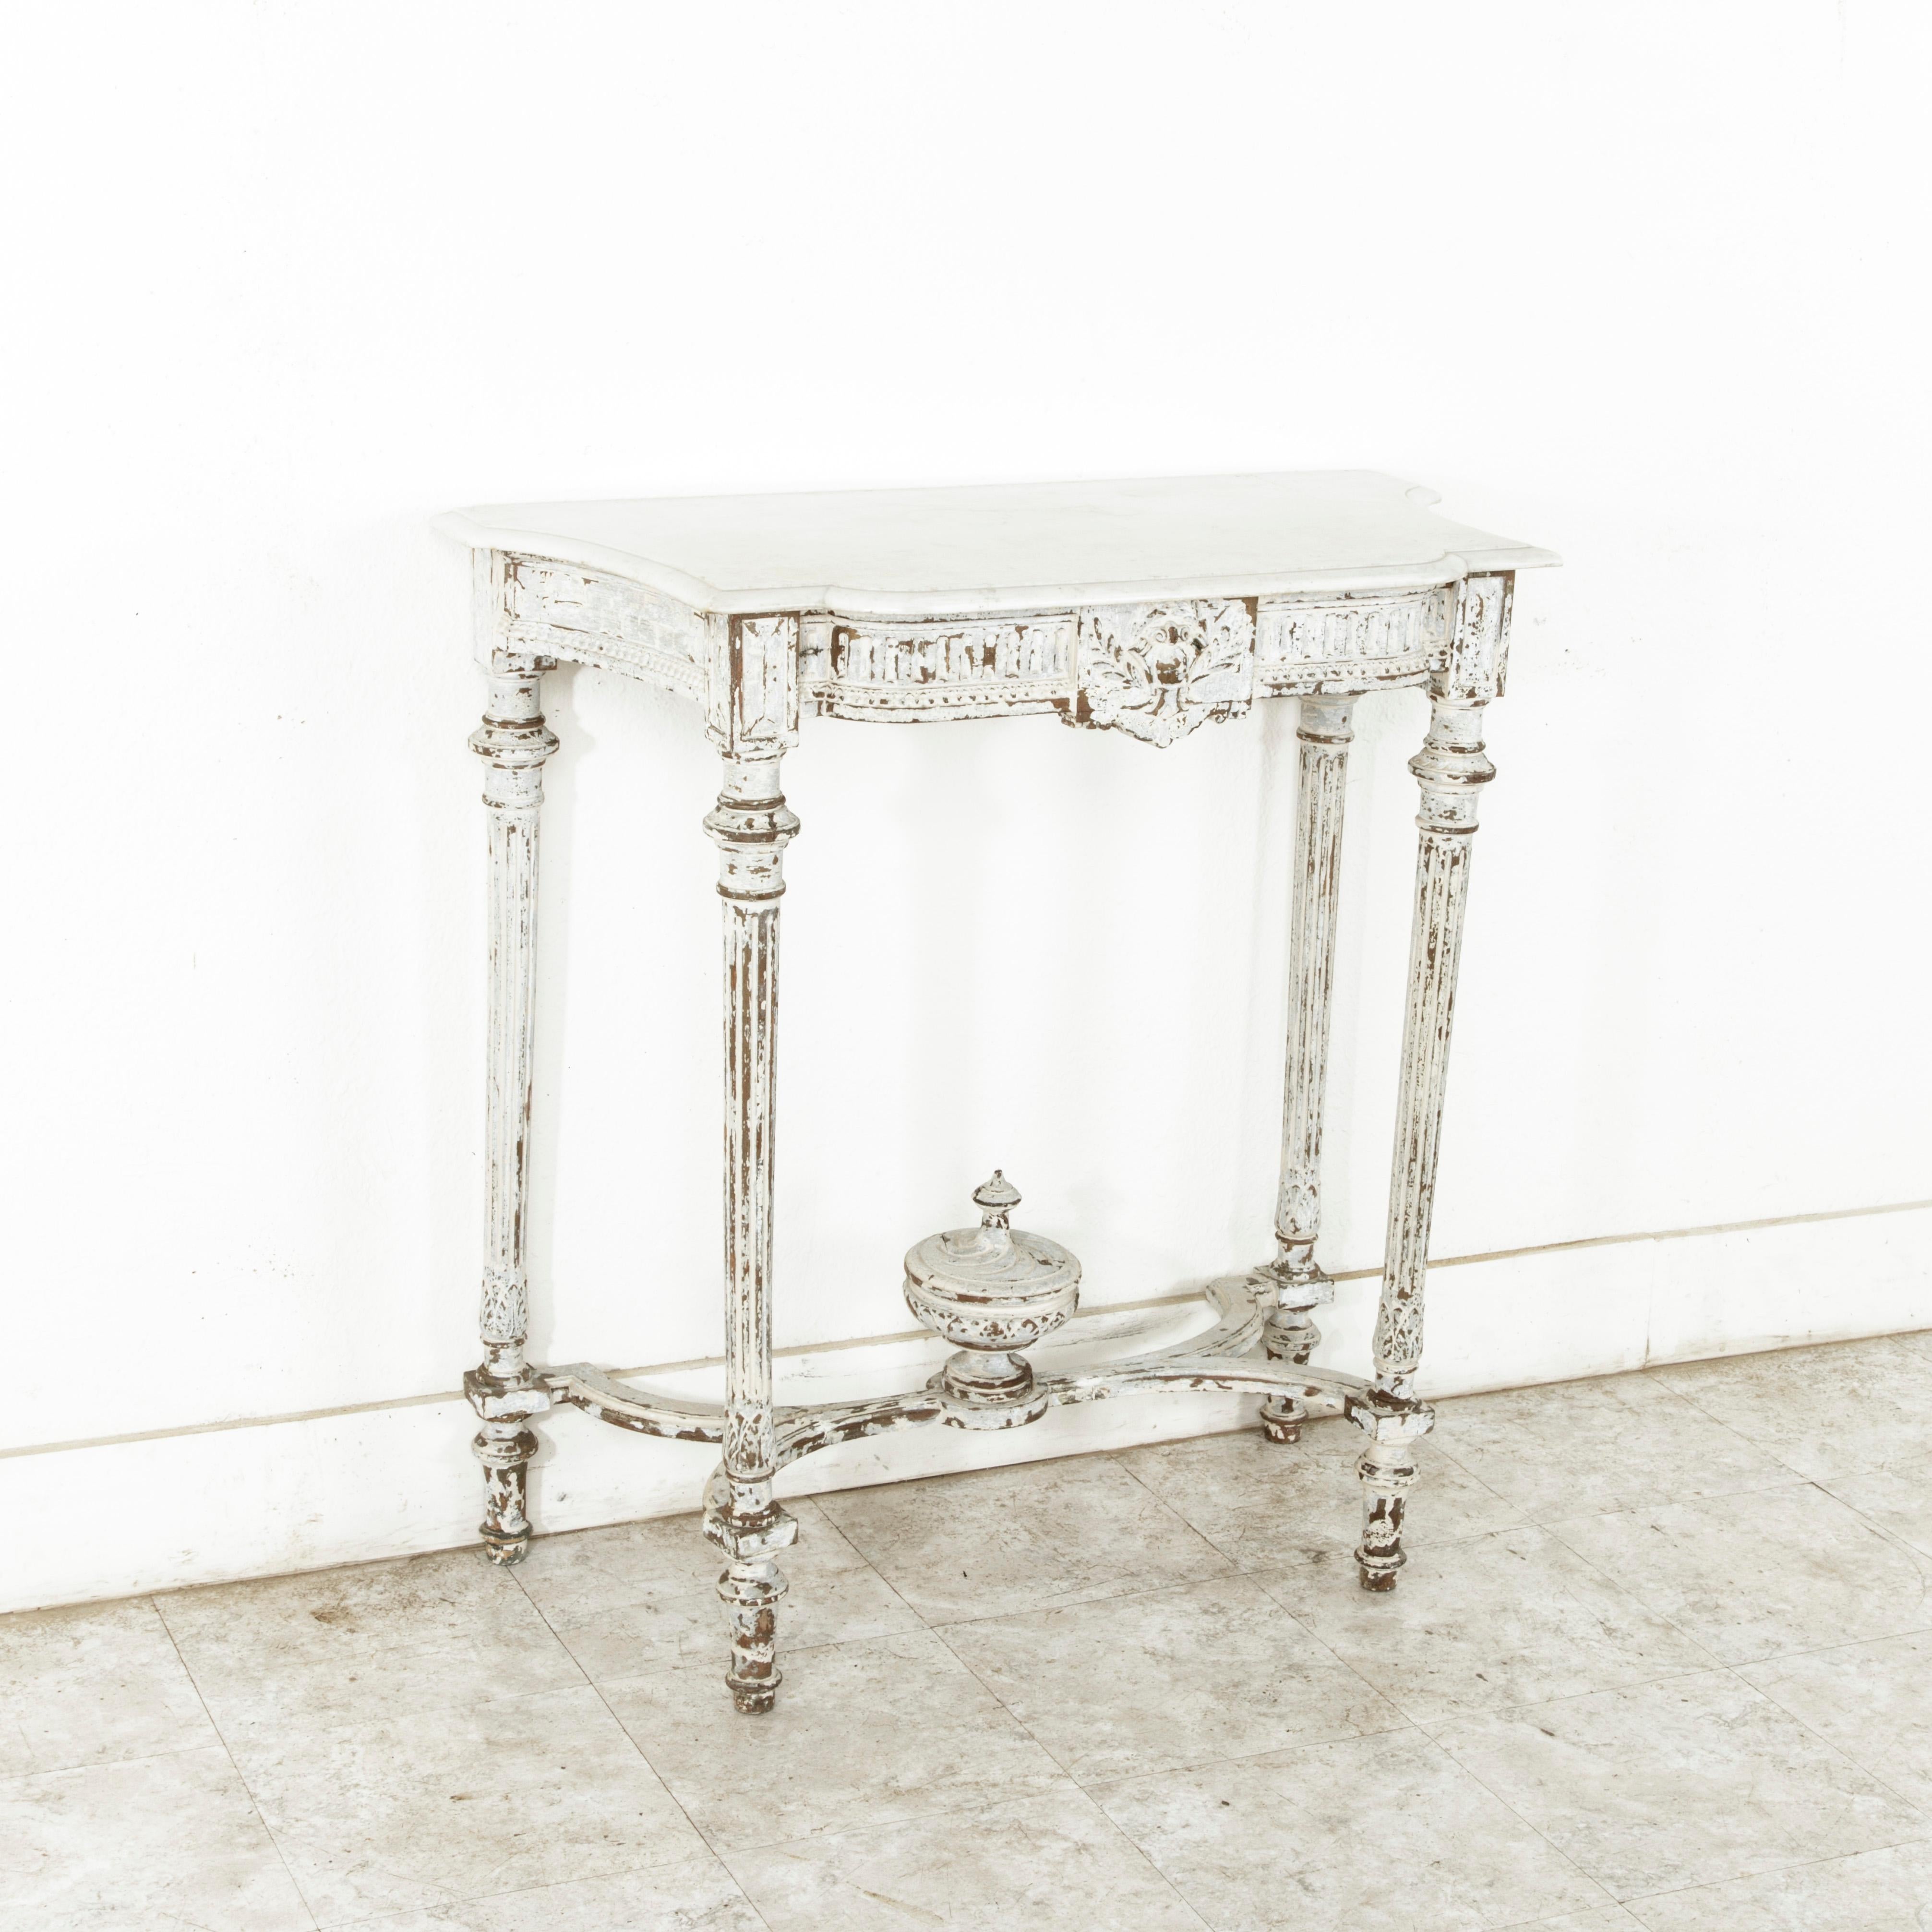 This late 19th century French Louis XVI style hand carved painted console table features its original beveled white marble top. The top is supported by four tapered fluted legs joined by an curved X stretcher. A central finial adorns the stretcher.